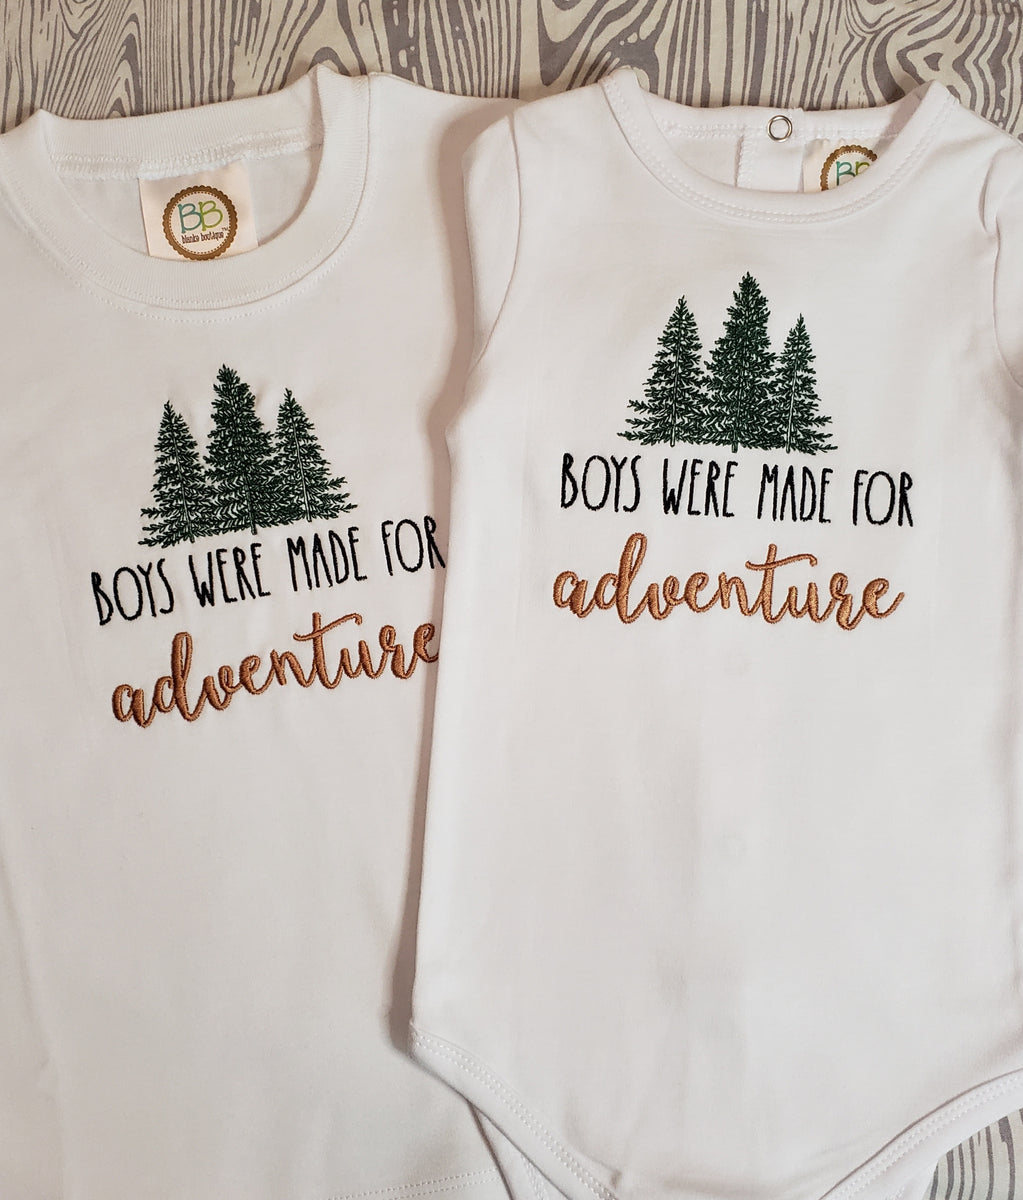 Boys were made for adventure custom brother shirt and onesie